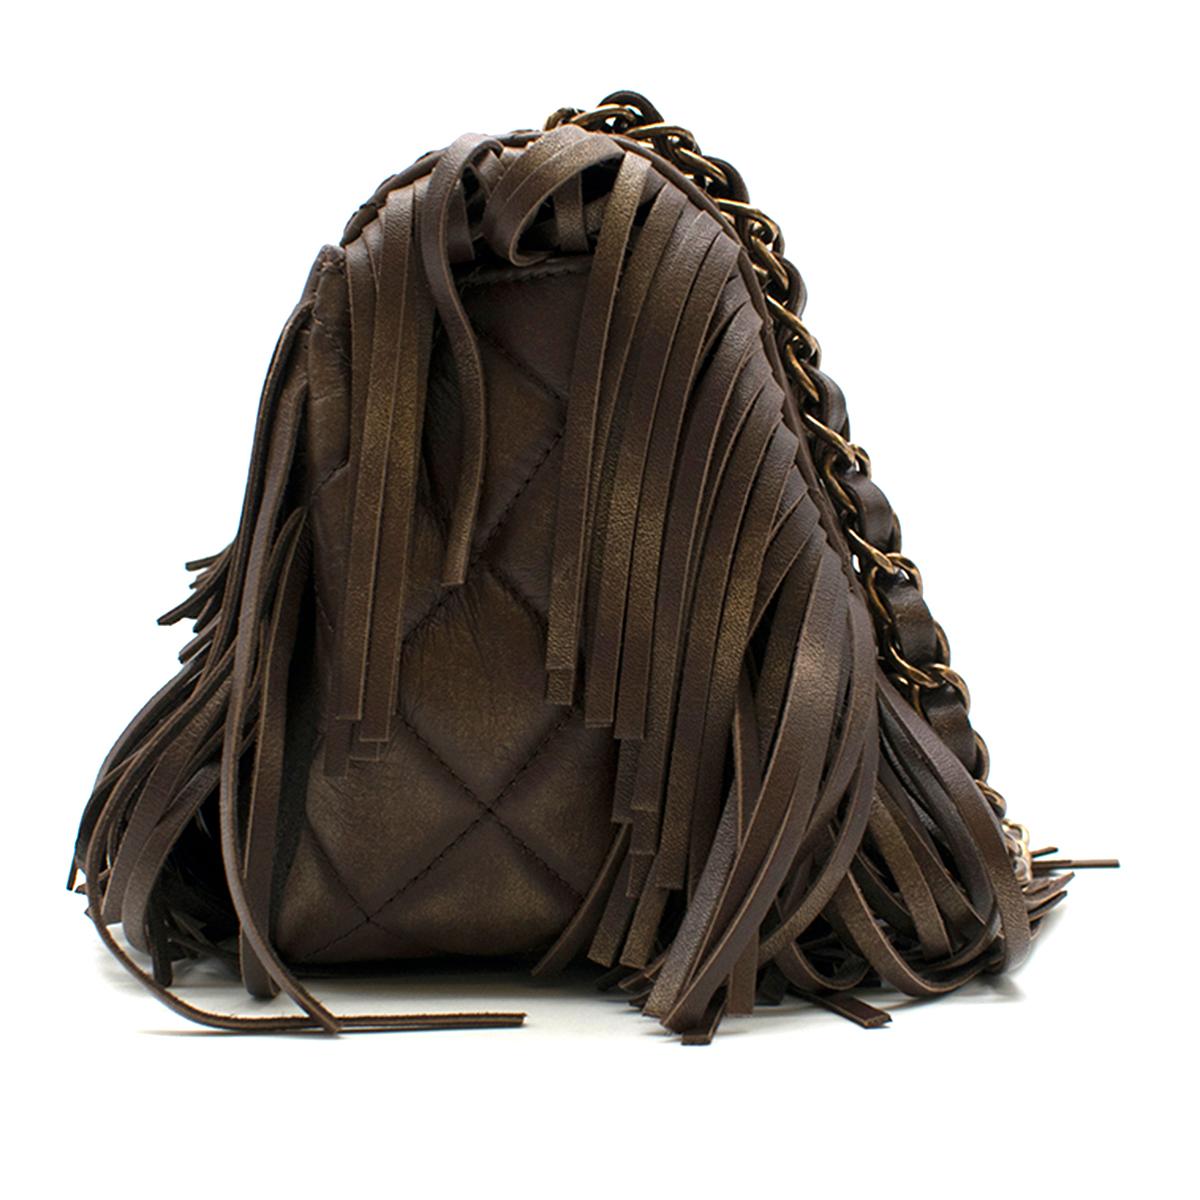 Chanel Brown Paris-Dallas Fringe Flap Bag

-Brown flap bag from the Paris-Dallas collection
-Quilted flap bag with tassel detailing
-Gold toned hardware
-Gold sheen to the leather
-Twist 'CC' clasp
-One main interior pocket with one zipped